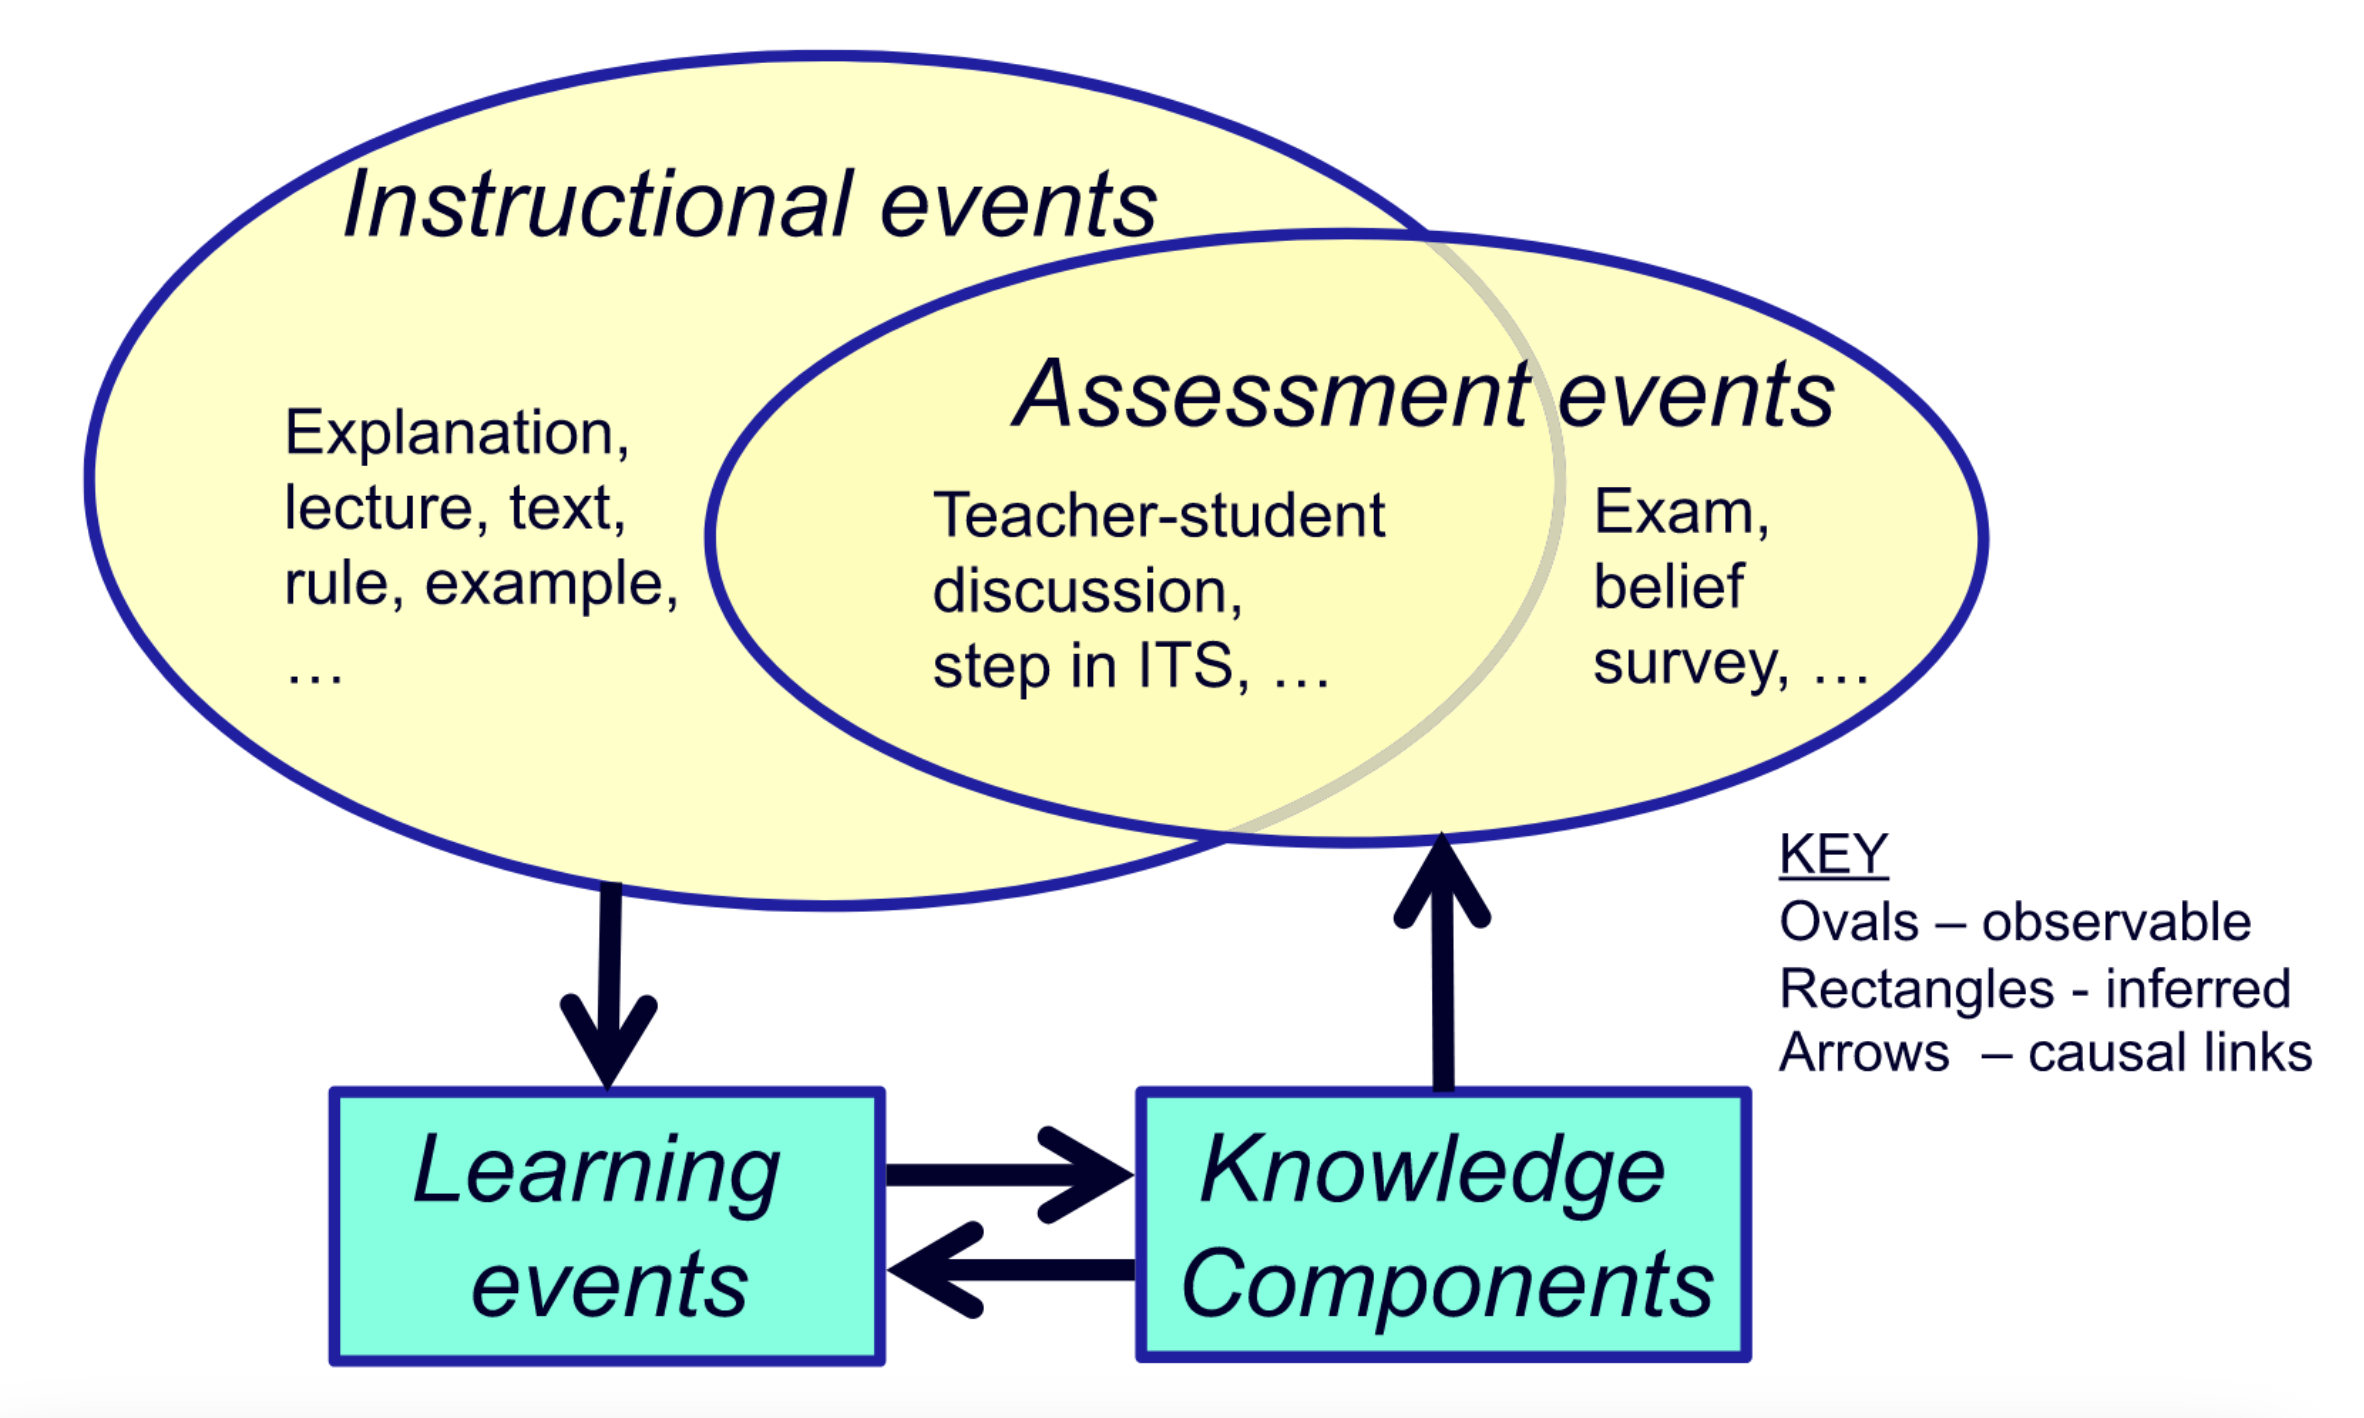 A diagram, depicting how observable instructional events (lectures, examples) influence unobservable learning events, which in turn influence unobservable knowledge components, which finally can be assessed by observable assessment events (exams, surveys).